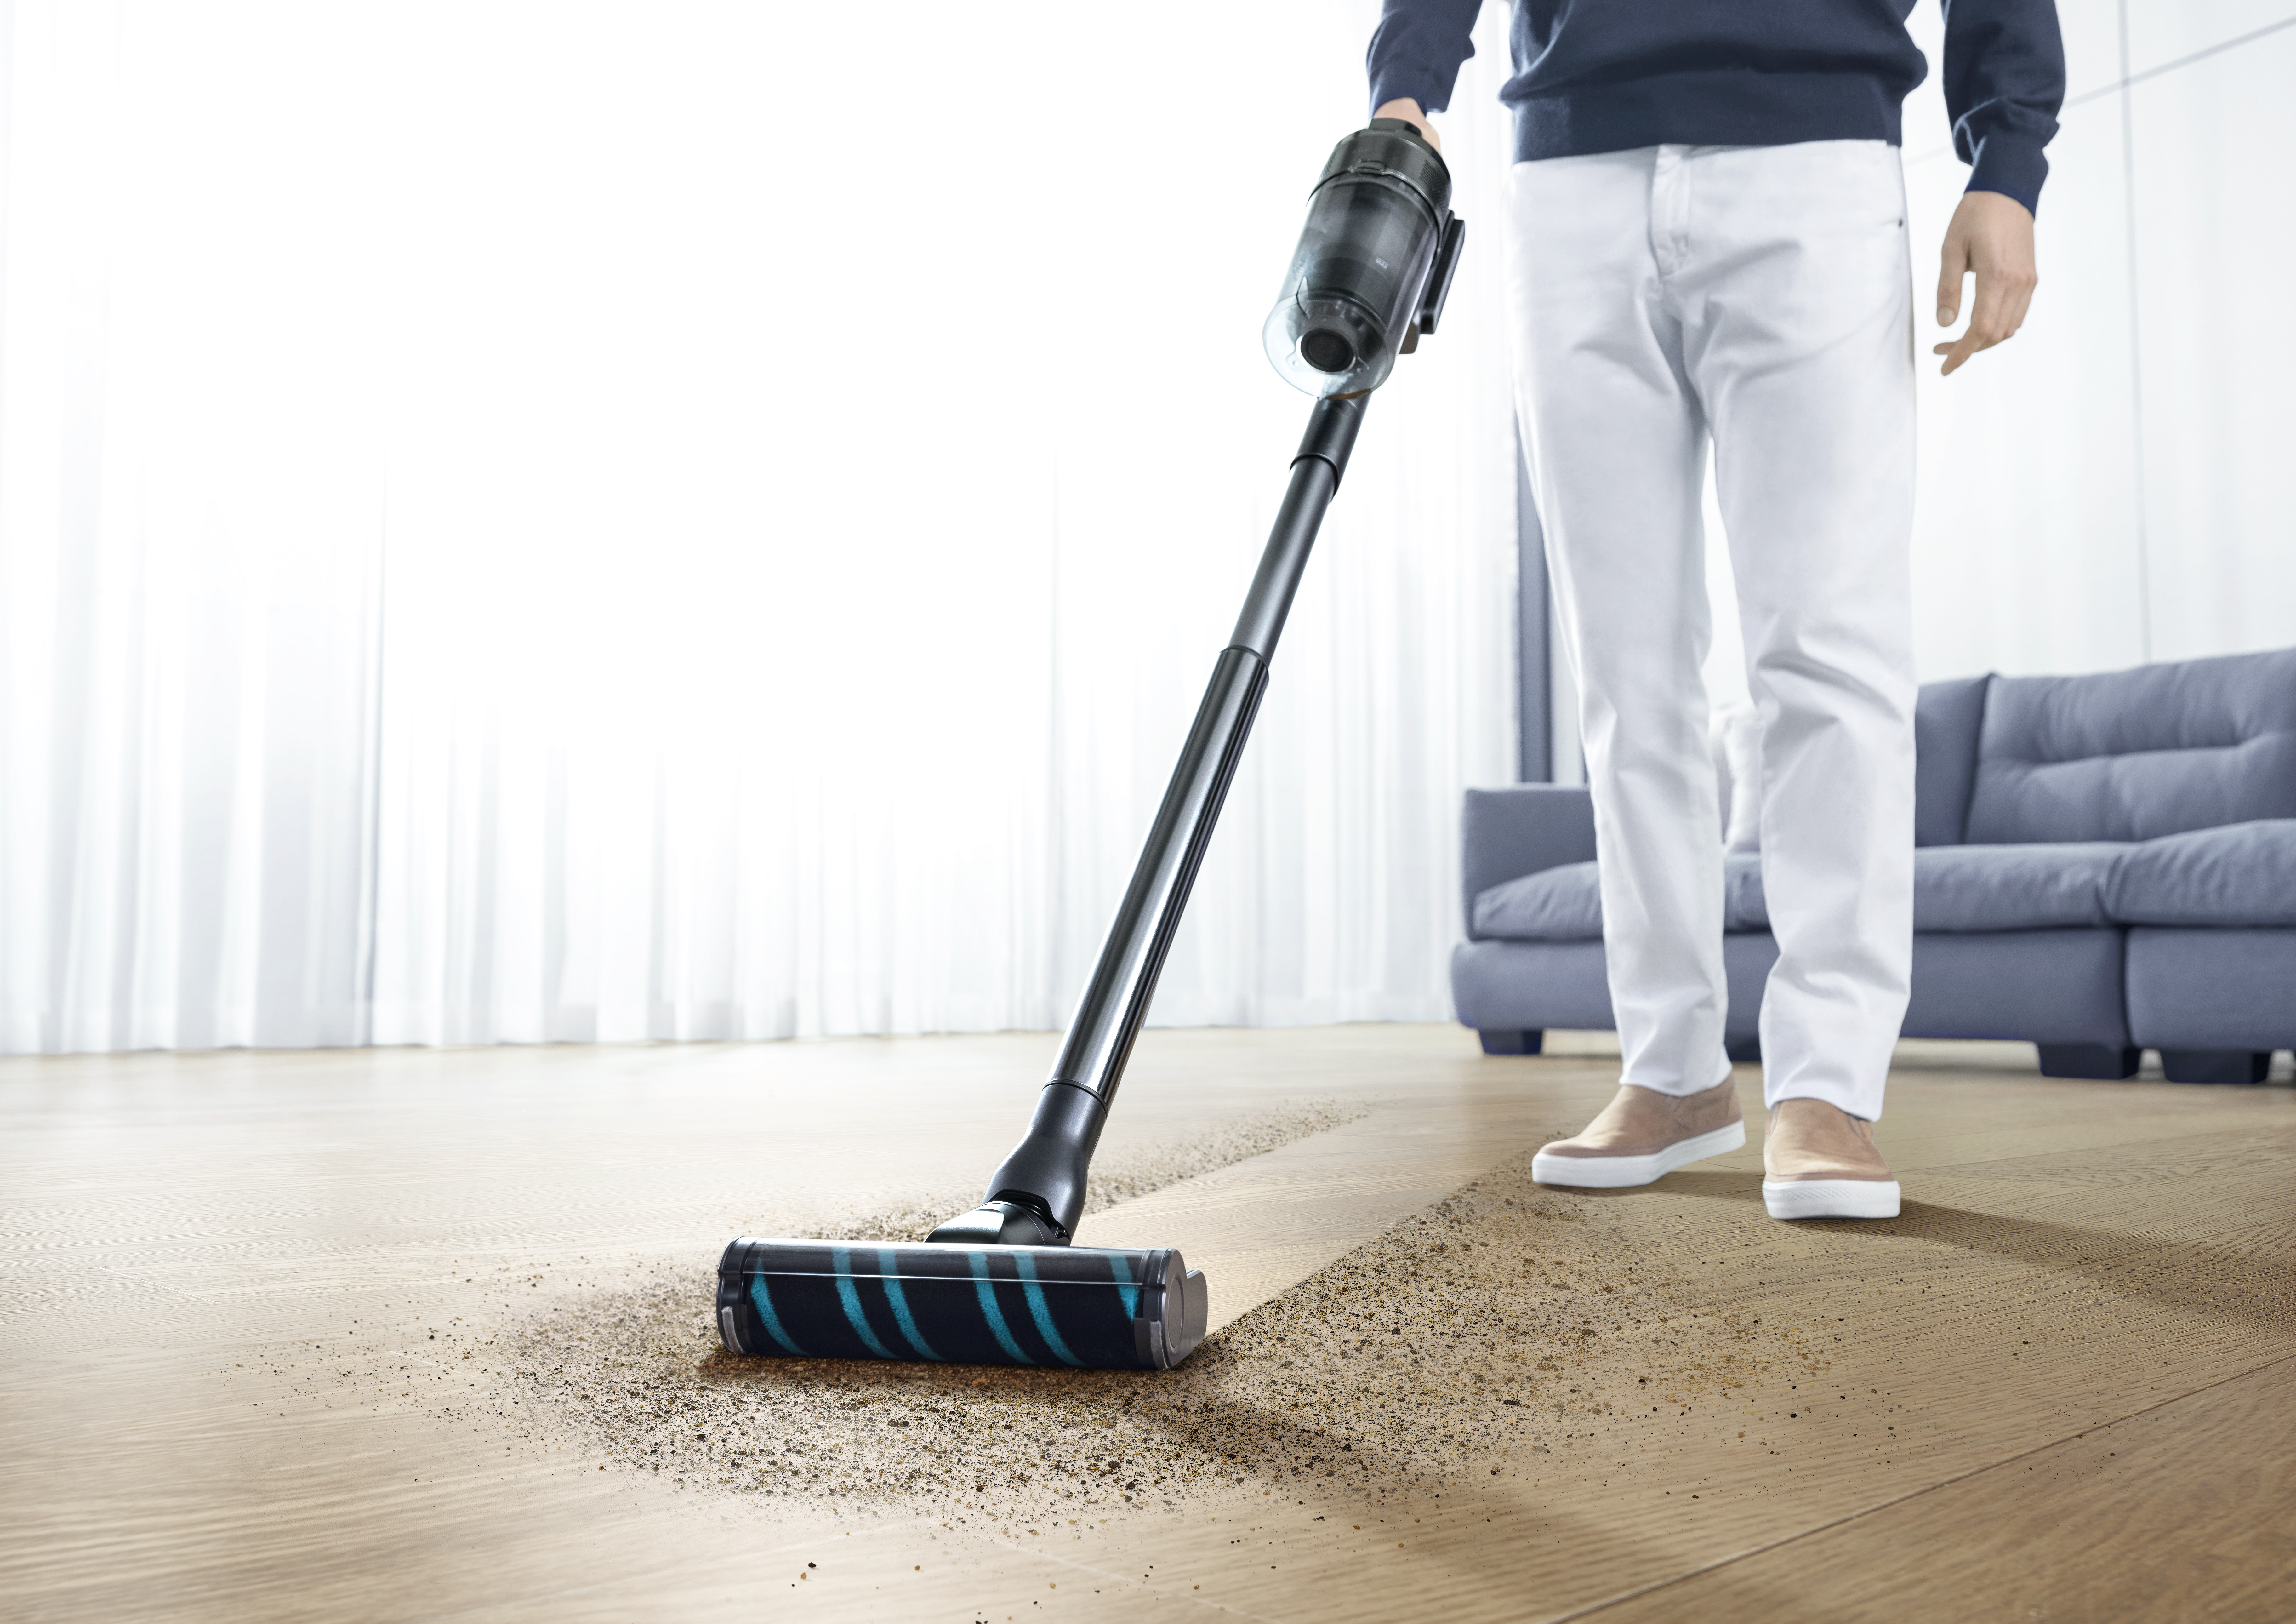 VS9000RL lifestyle Samsung Samsung’s New Cordless Jet Stick Vacuums Roll Out Across Oz Today